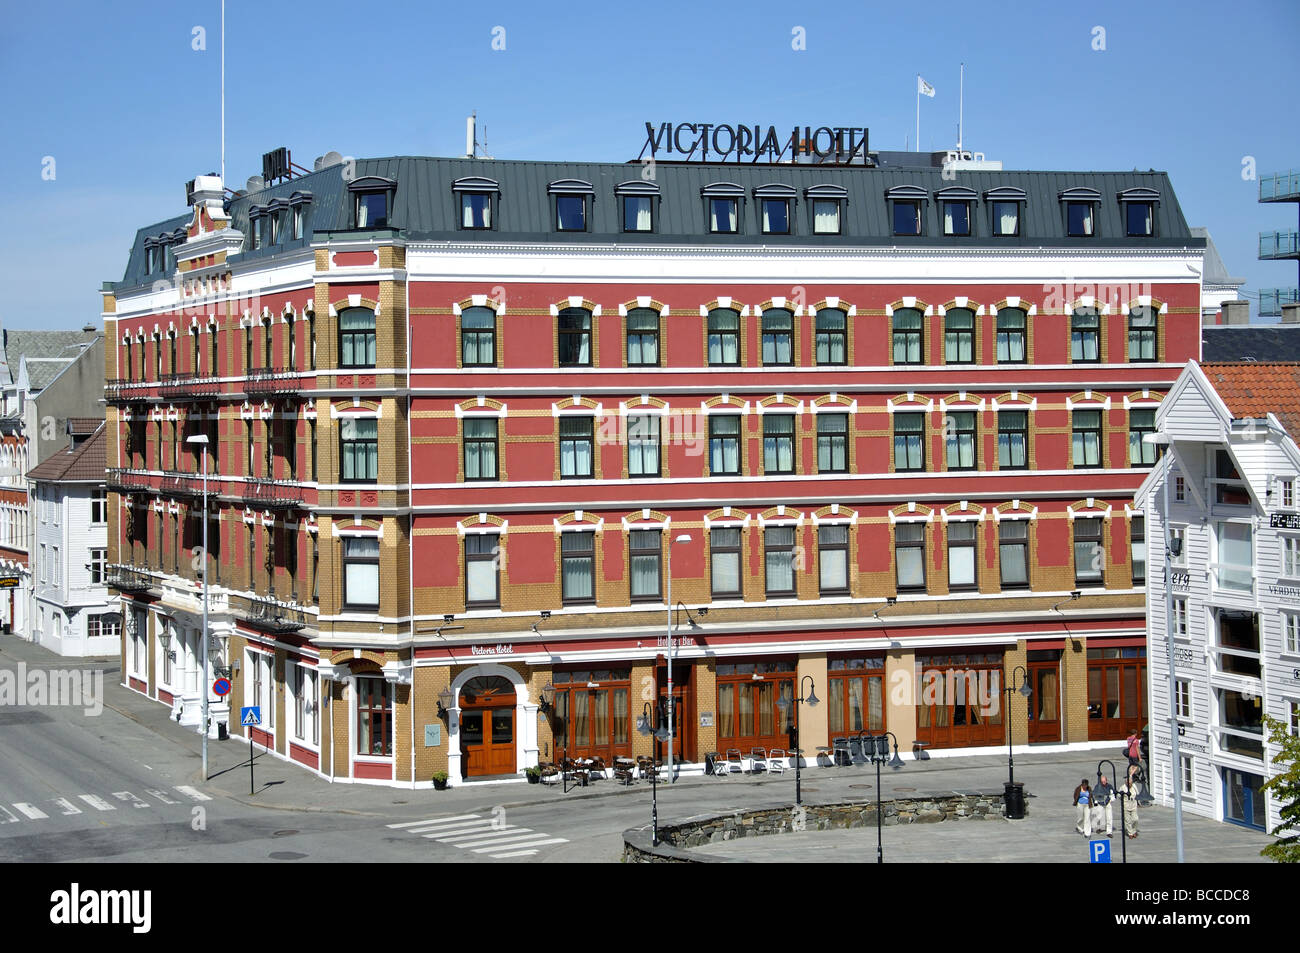 Hotel Stavanger High Resolution Stock Photography and Images - Alamy